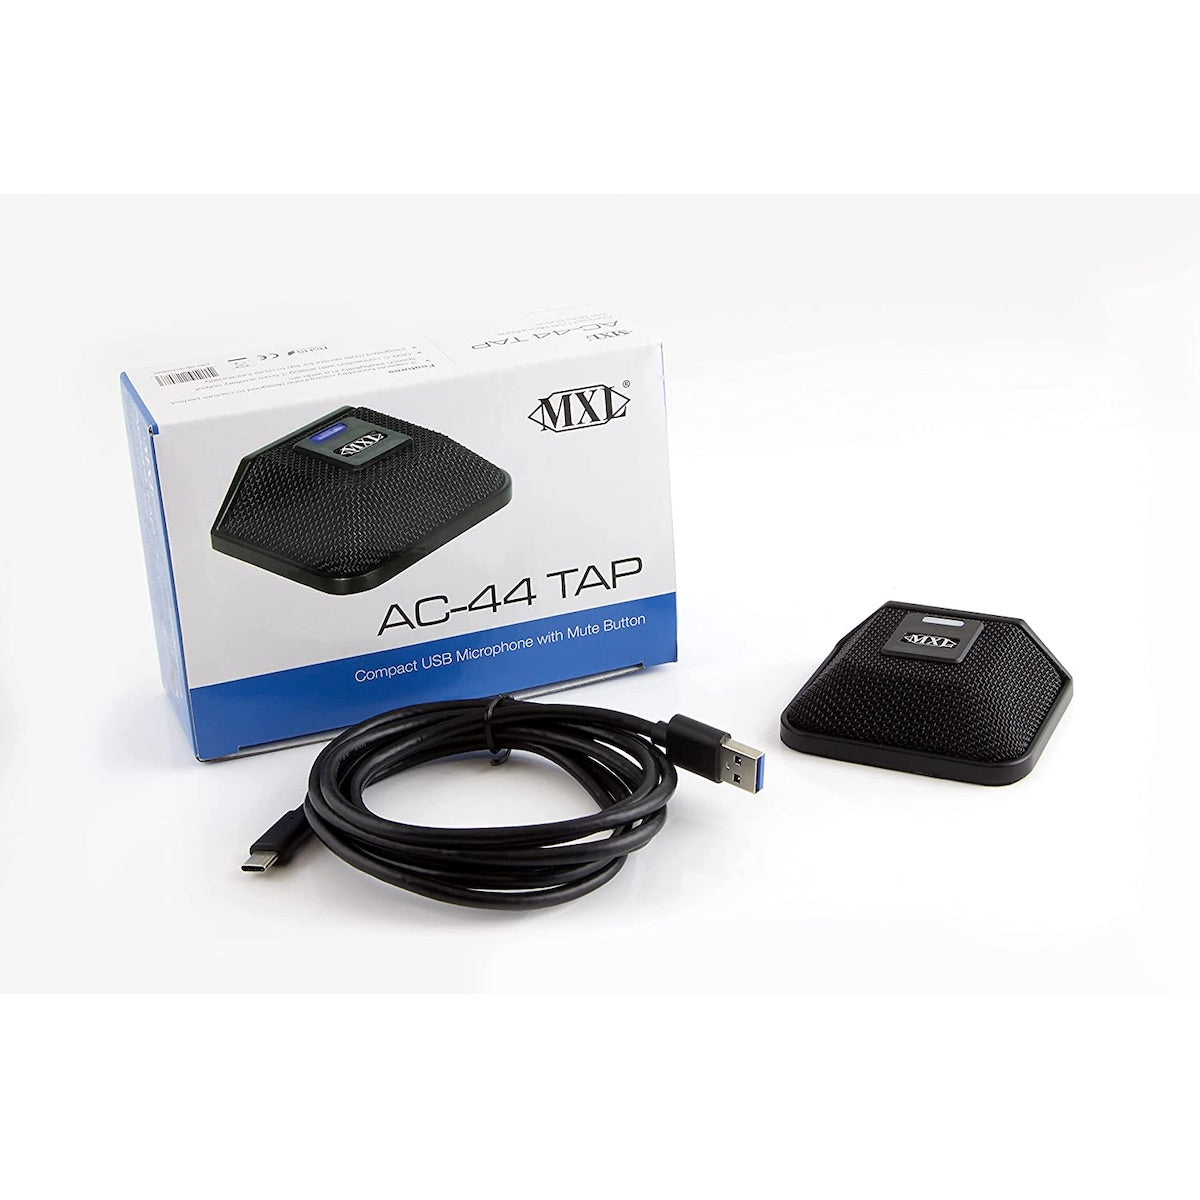 MXL AC-44 Tap - USB-C Miniature Microphone with Mute Button, box